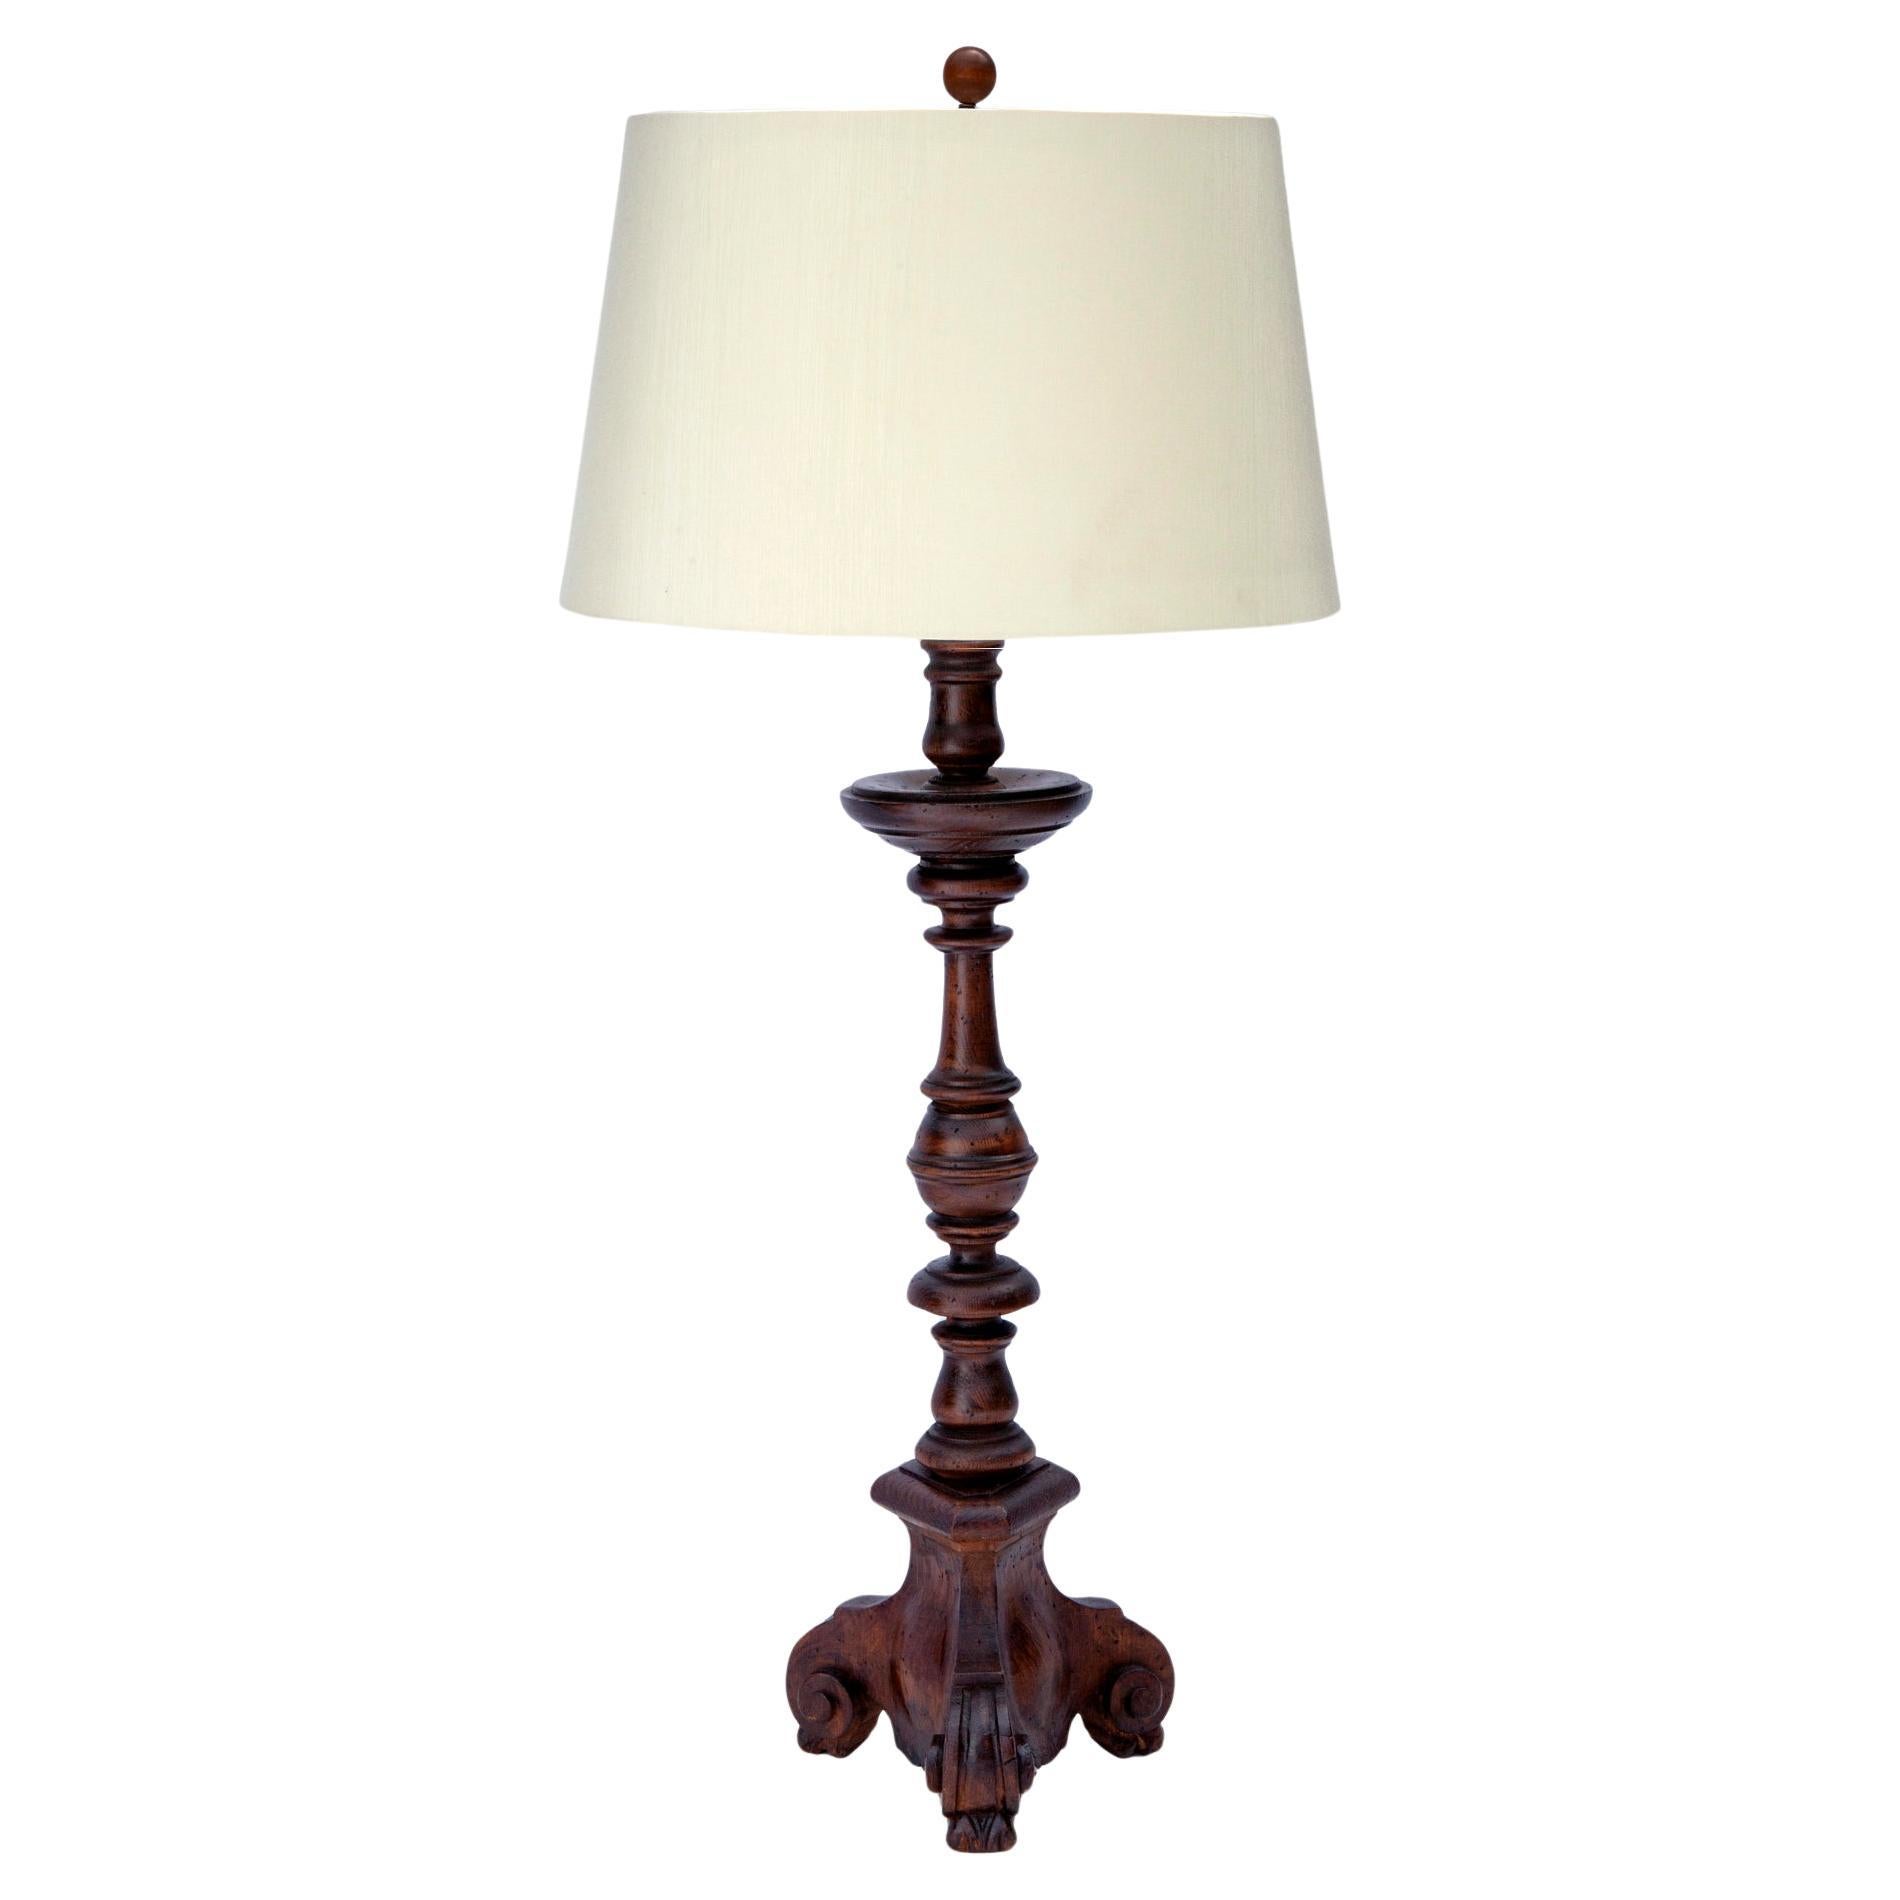 Chapman Manufacturing Company Table Lamps